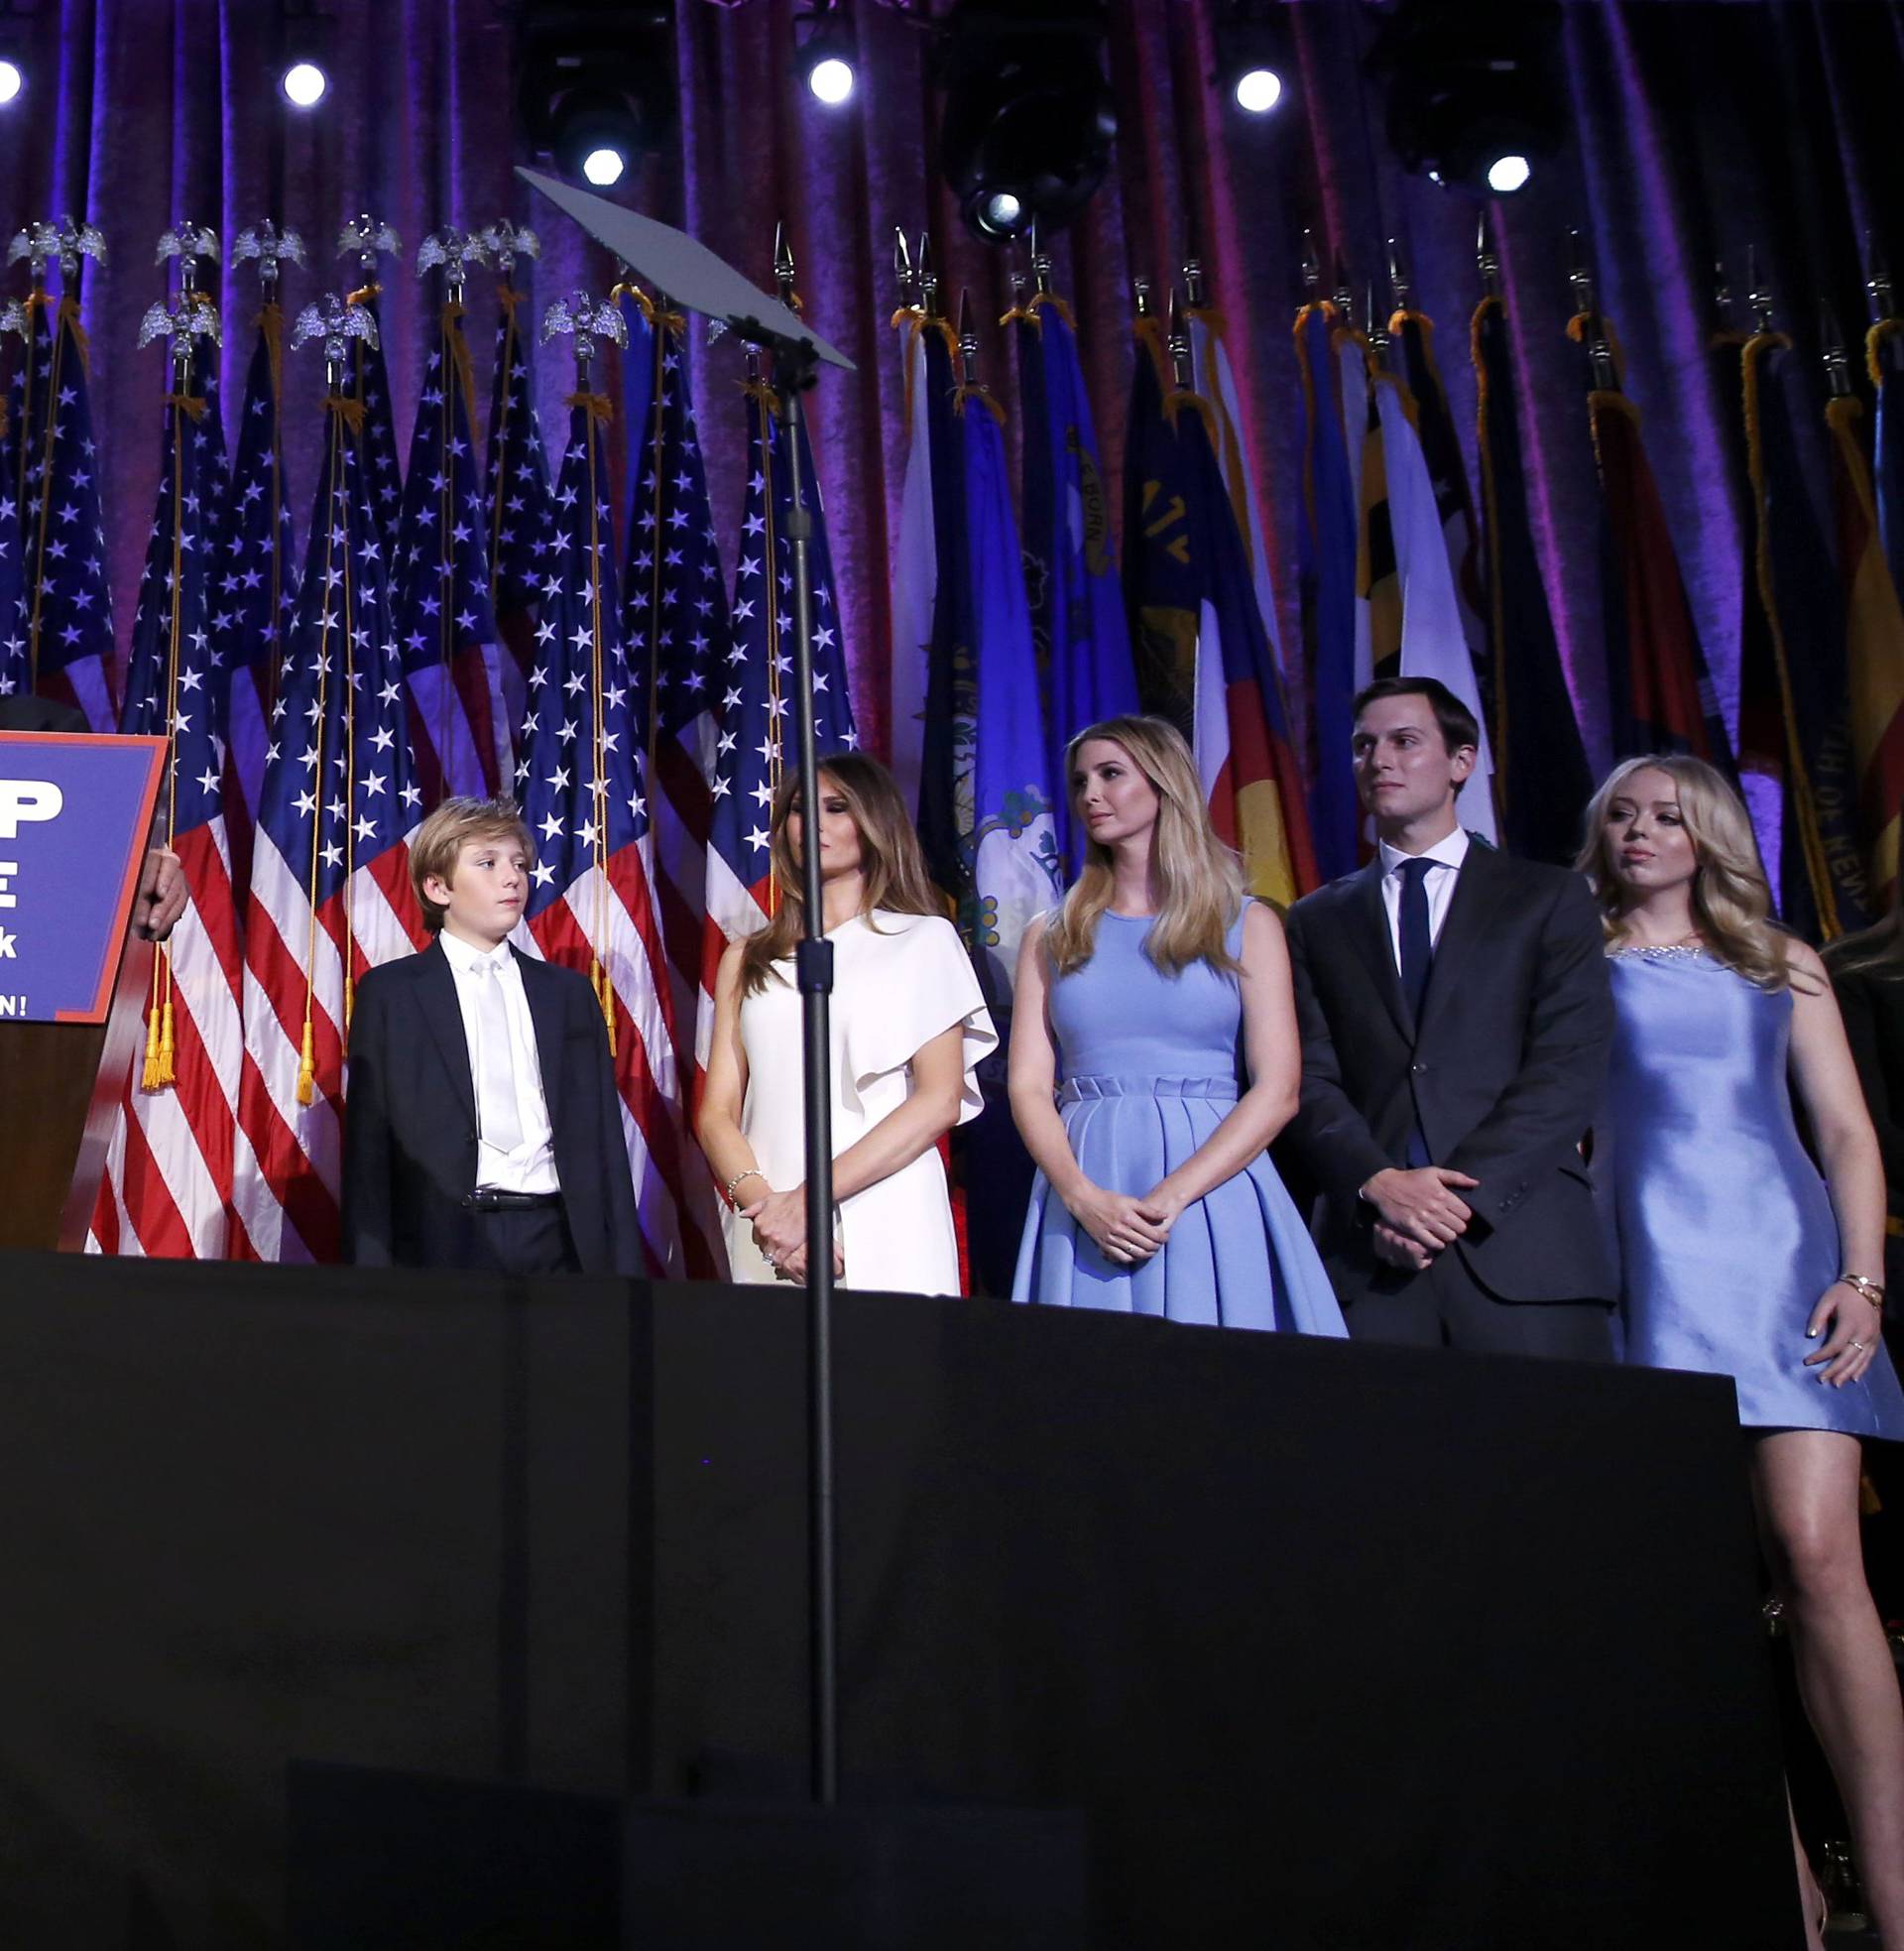 Republican U.S. president-elect Donald Trump stands with his family as he speaks at his election night rally in Manhattan, New York